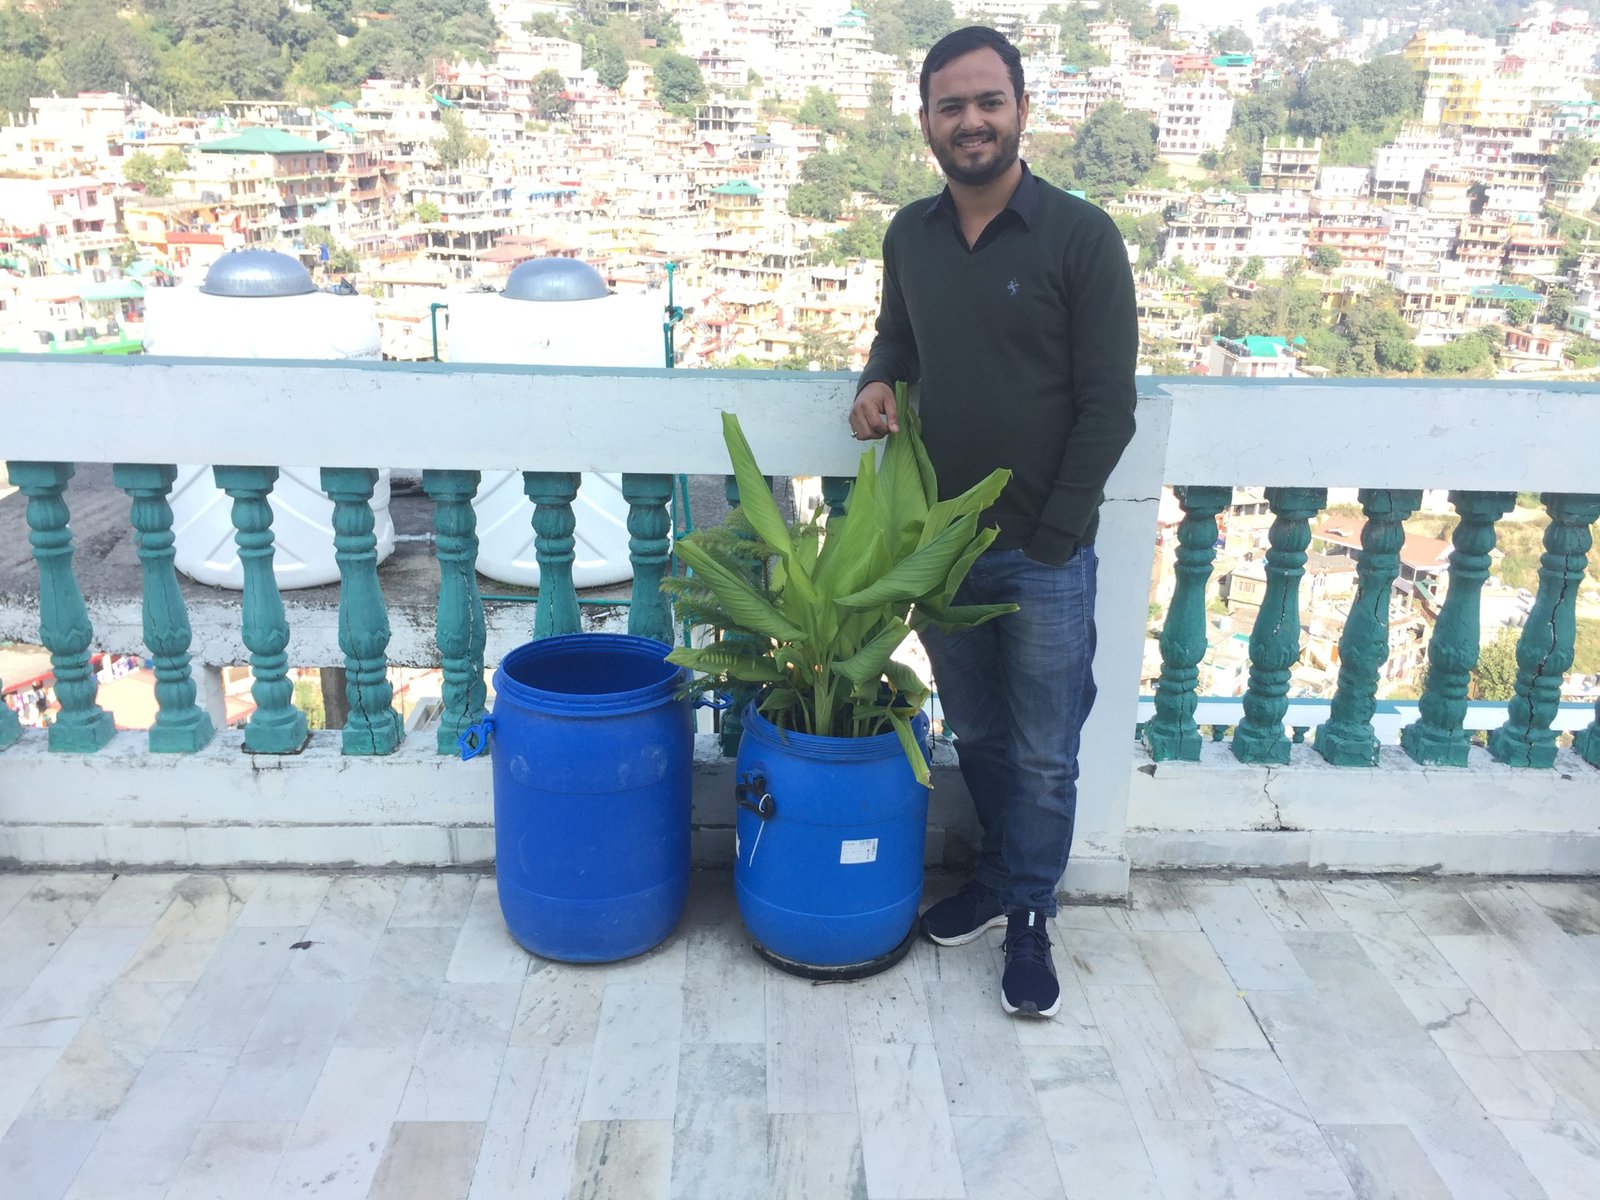 My Gardening experience – Guest Blog by Ankit Dhadwal